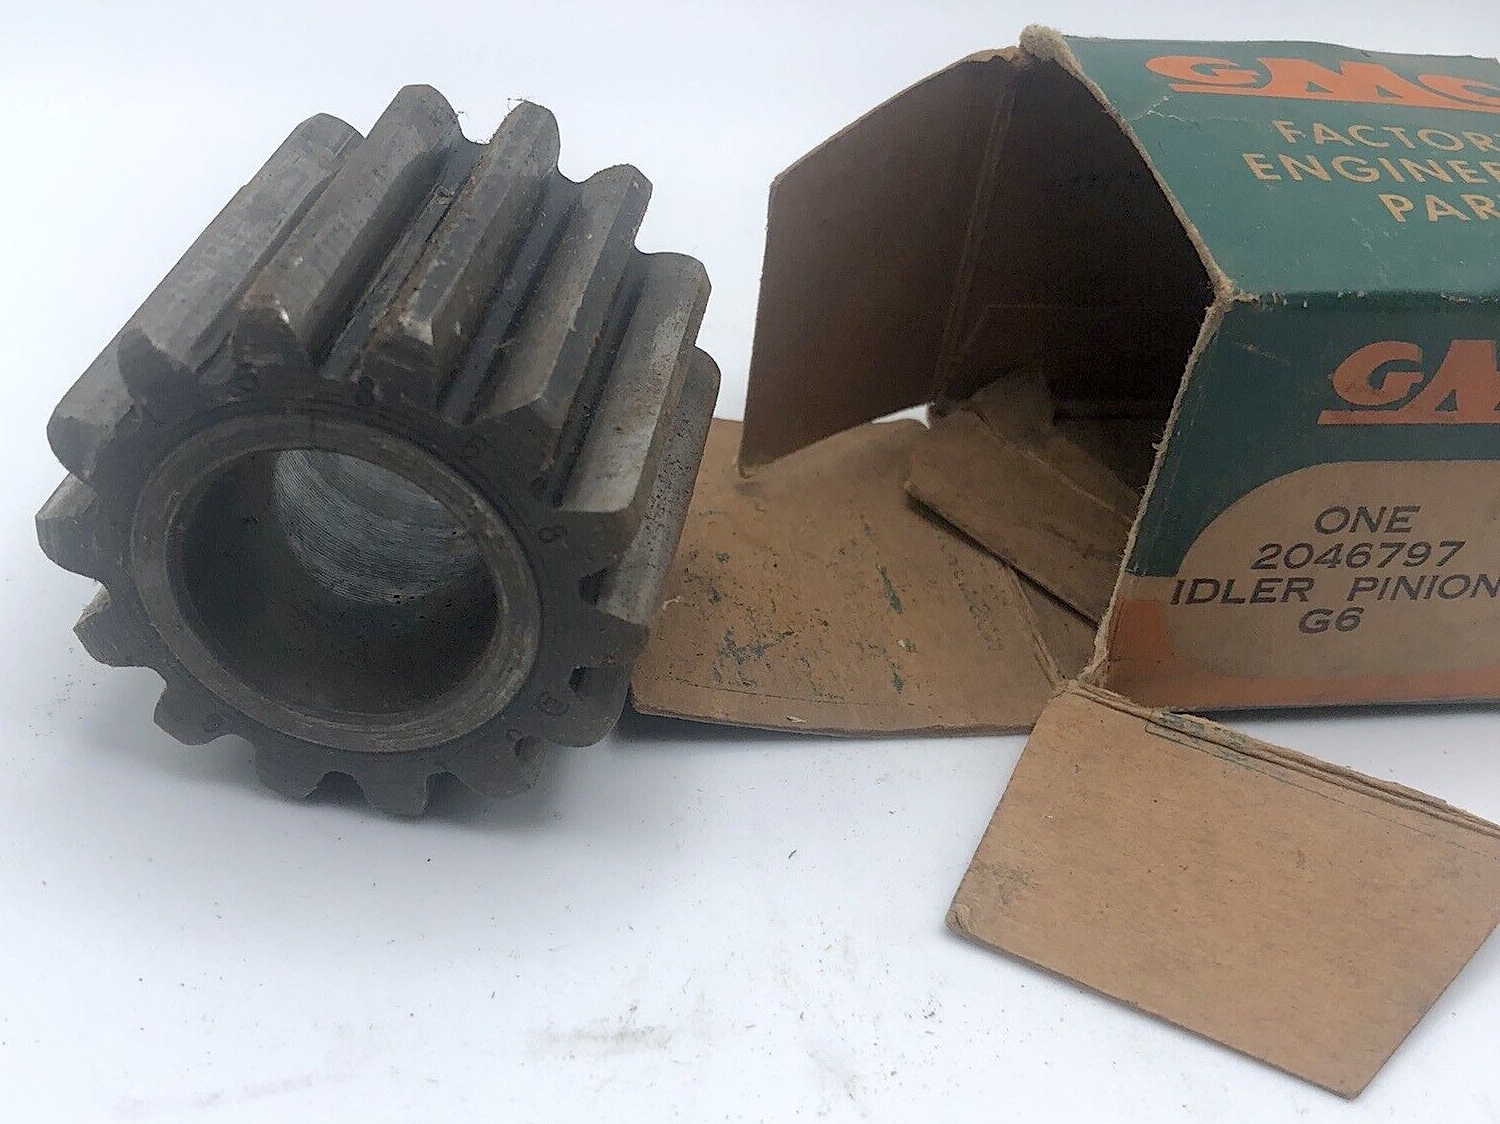 New old stock (NOS) pinion gear